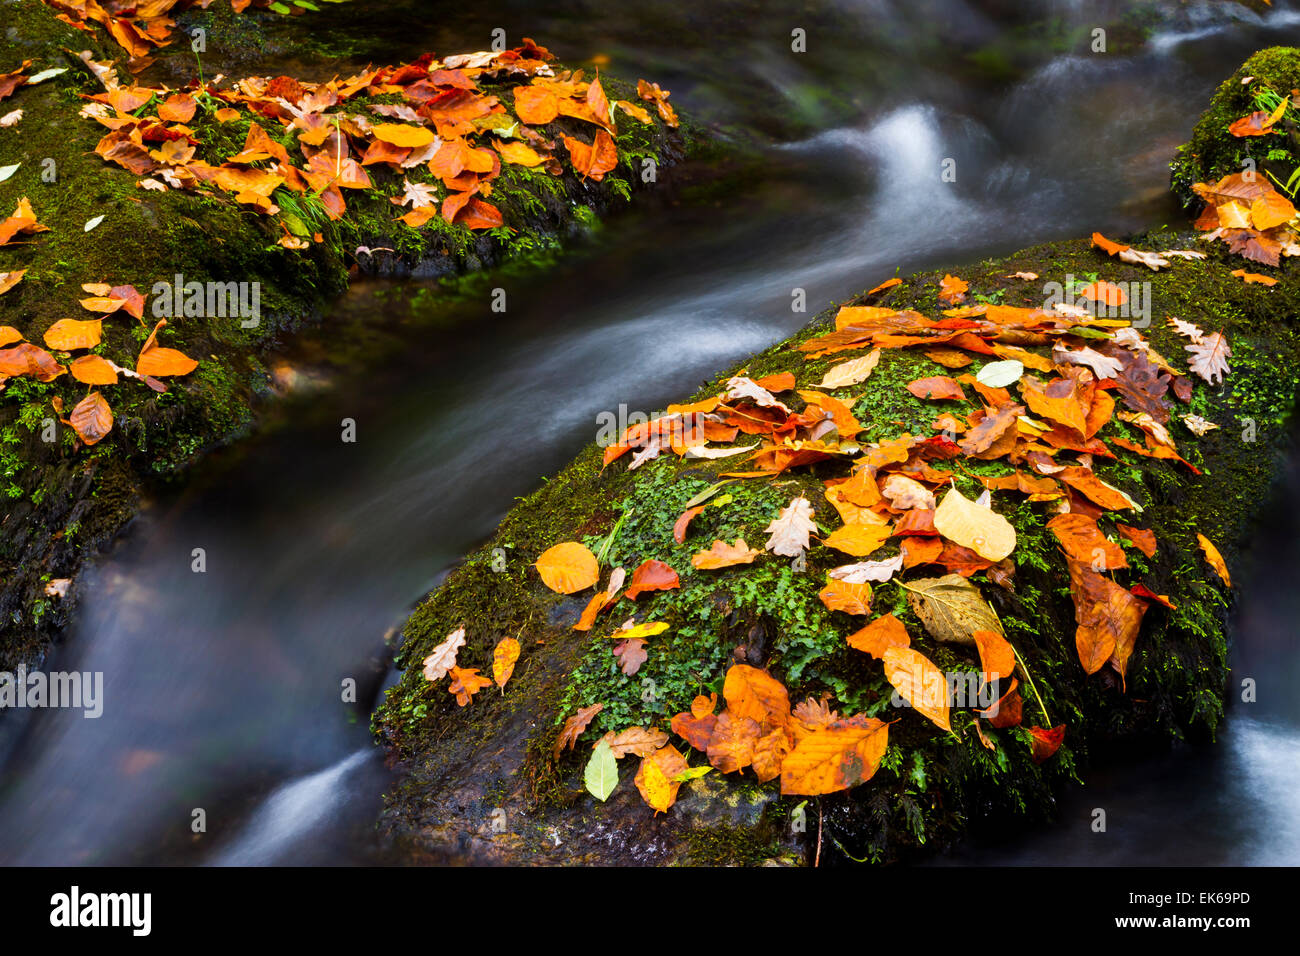 Forest and river in autumn. Ucieda. Ruente. Cabuerniga Valley. Cantabria, Spain, Europe. Stock Photo